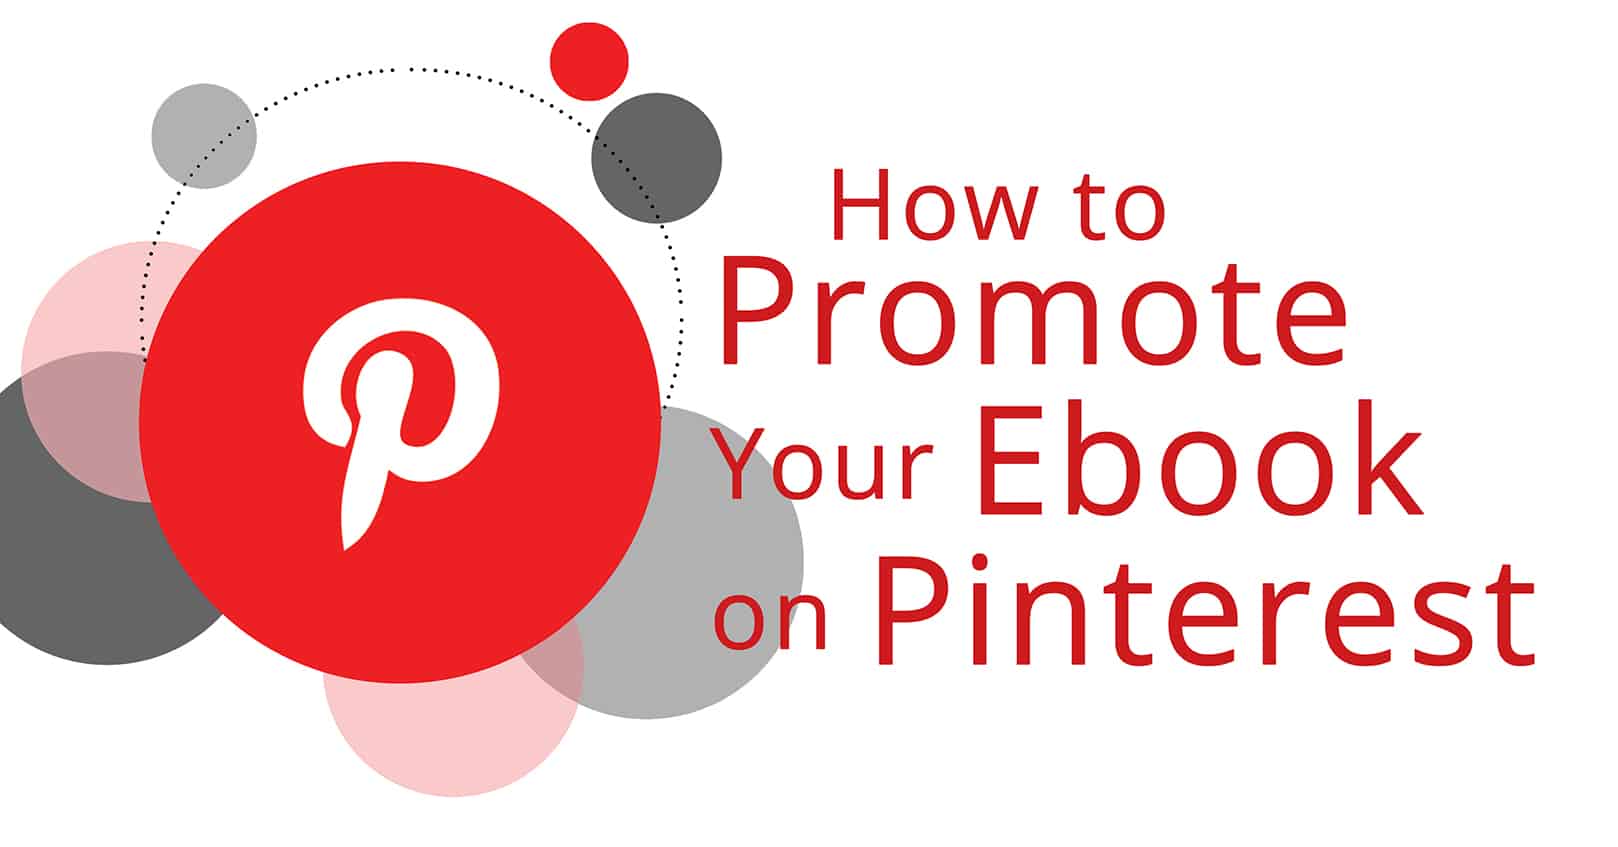 Promote Your Ebook on Pinterest